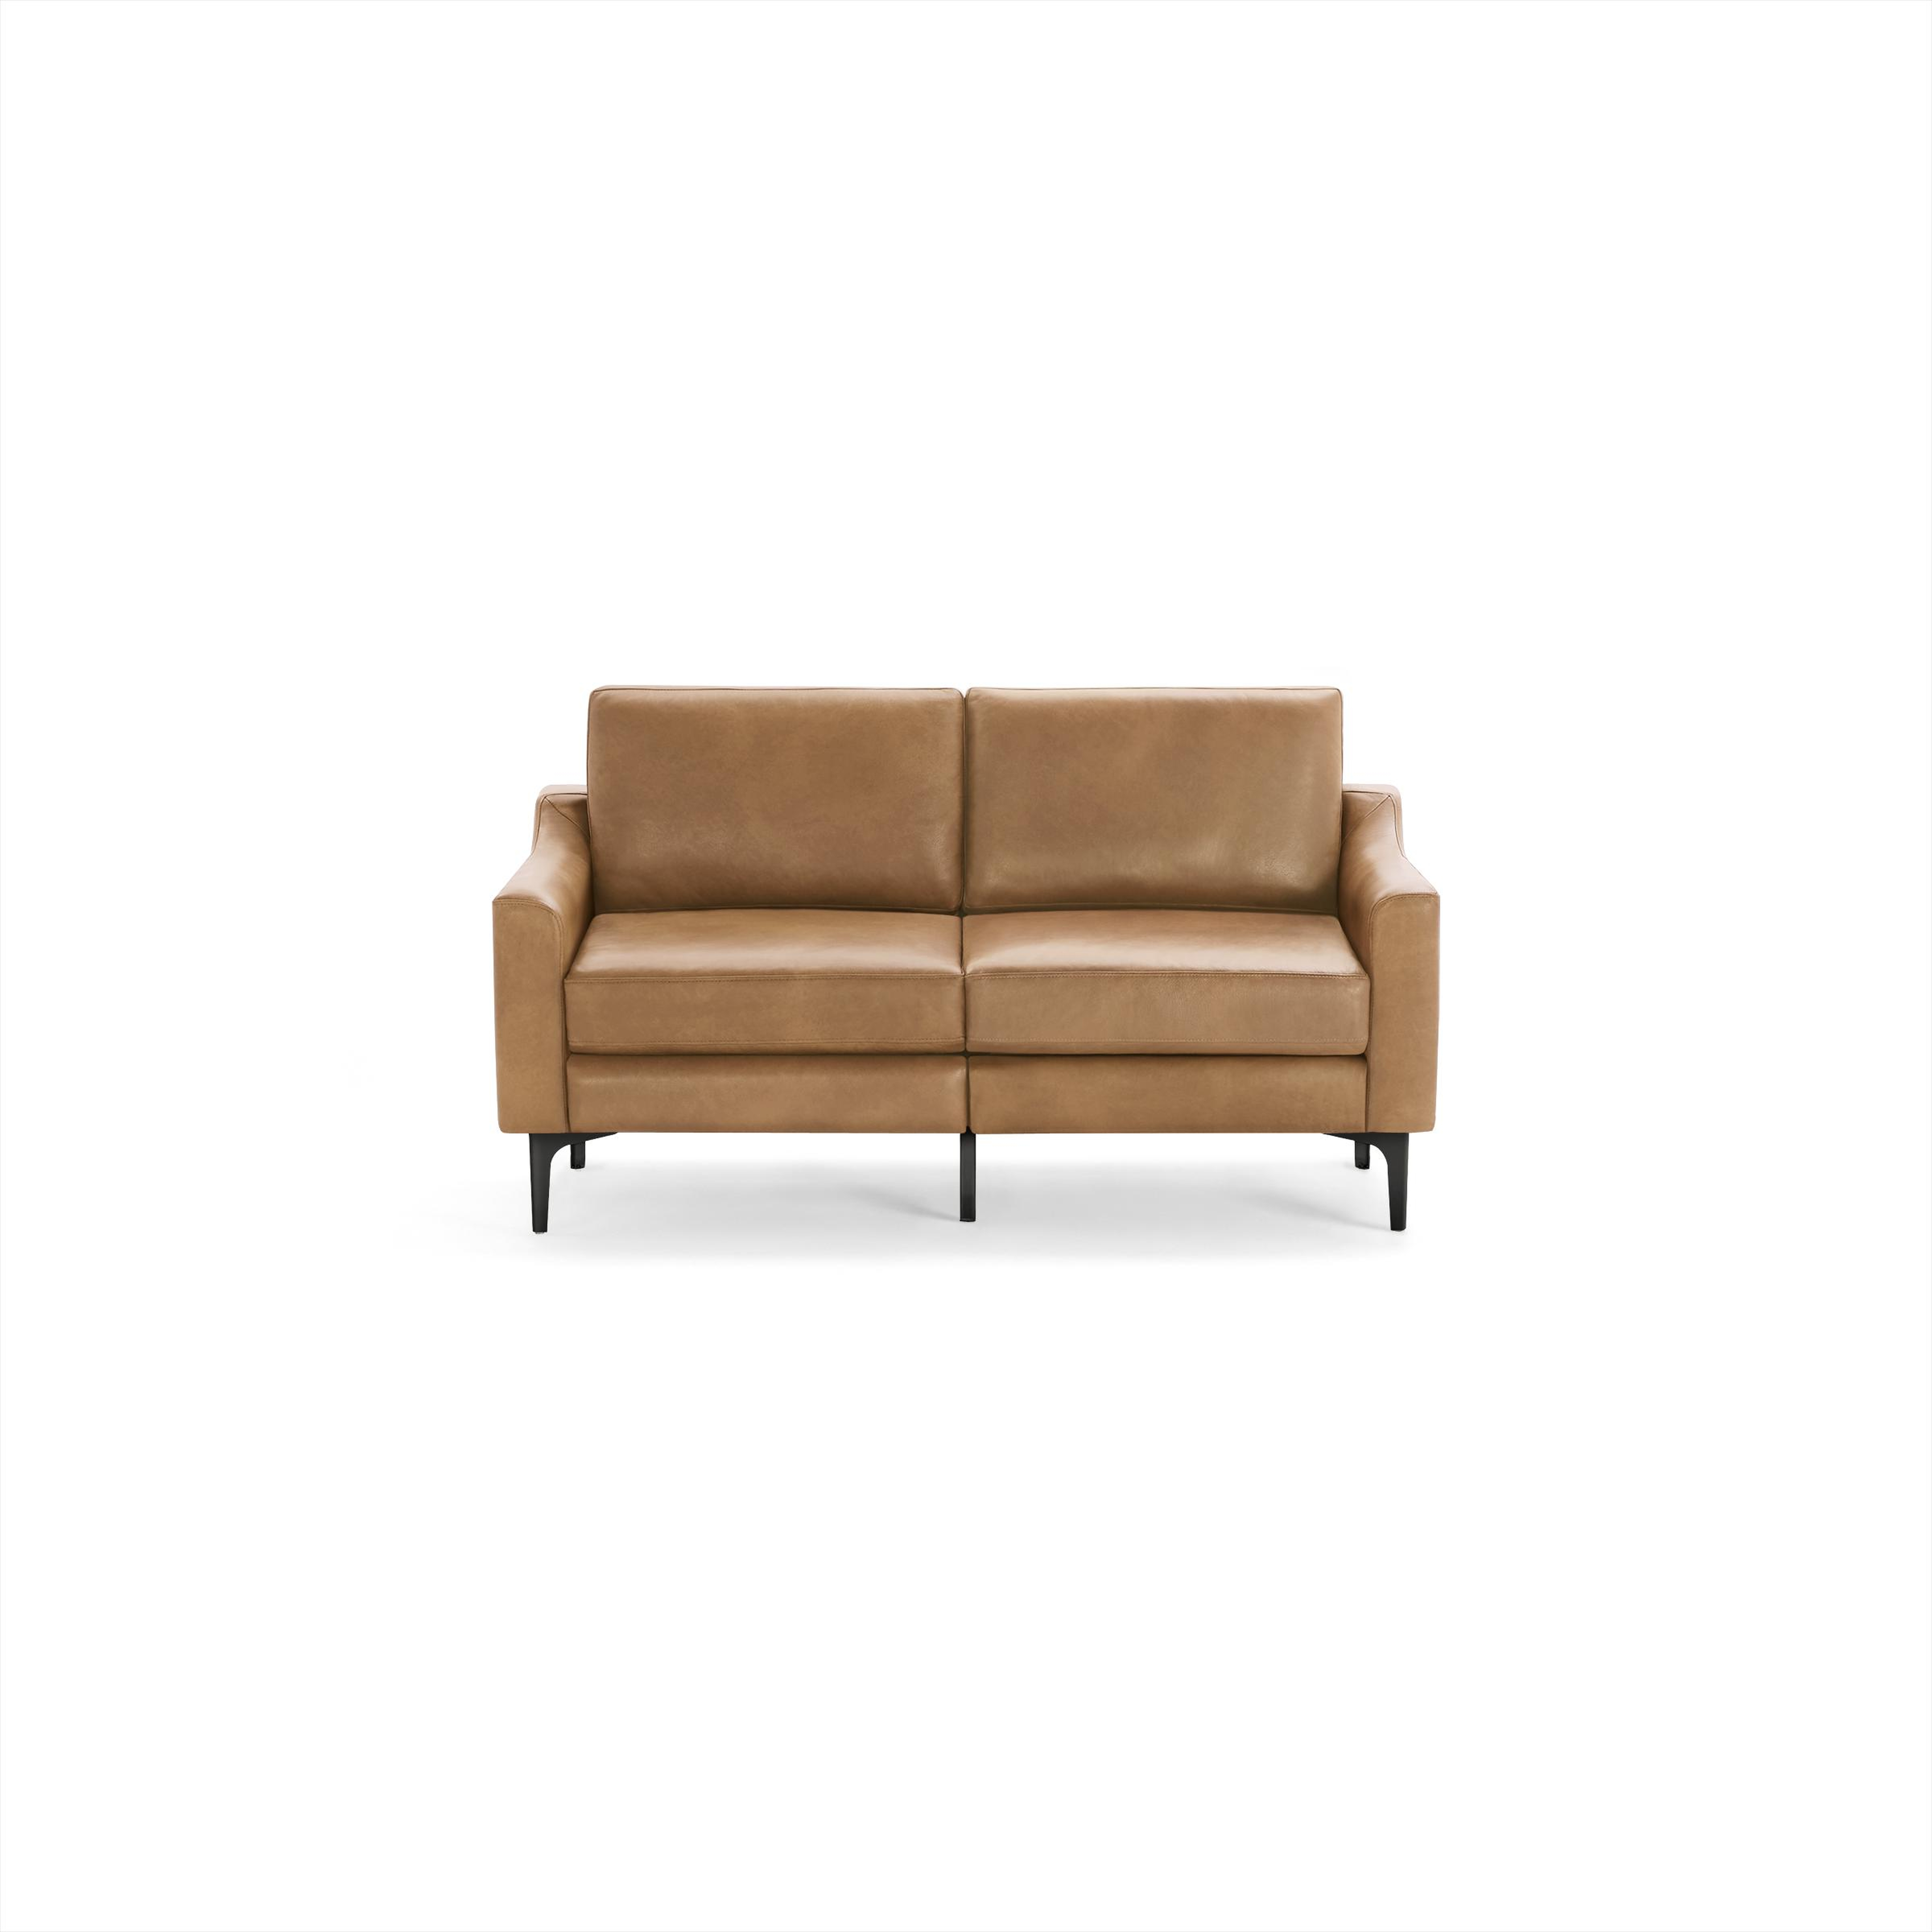 The Slope Nomad Leather Loveseat in Camel, Black Metal Leg - Burrow